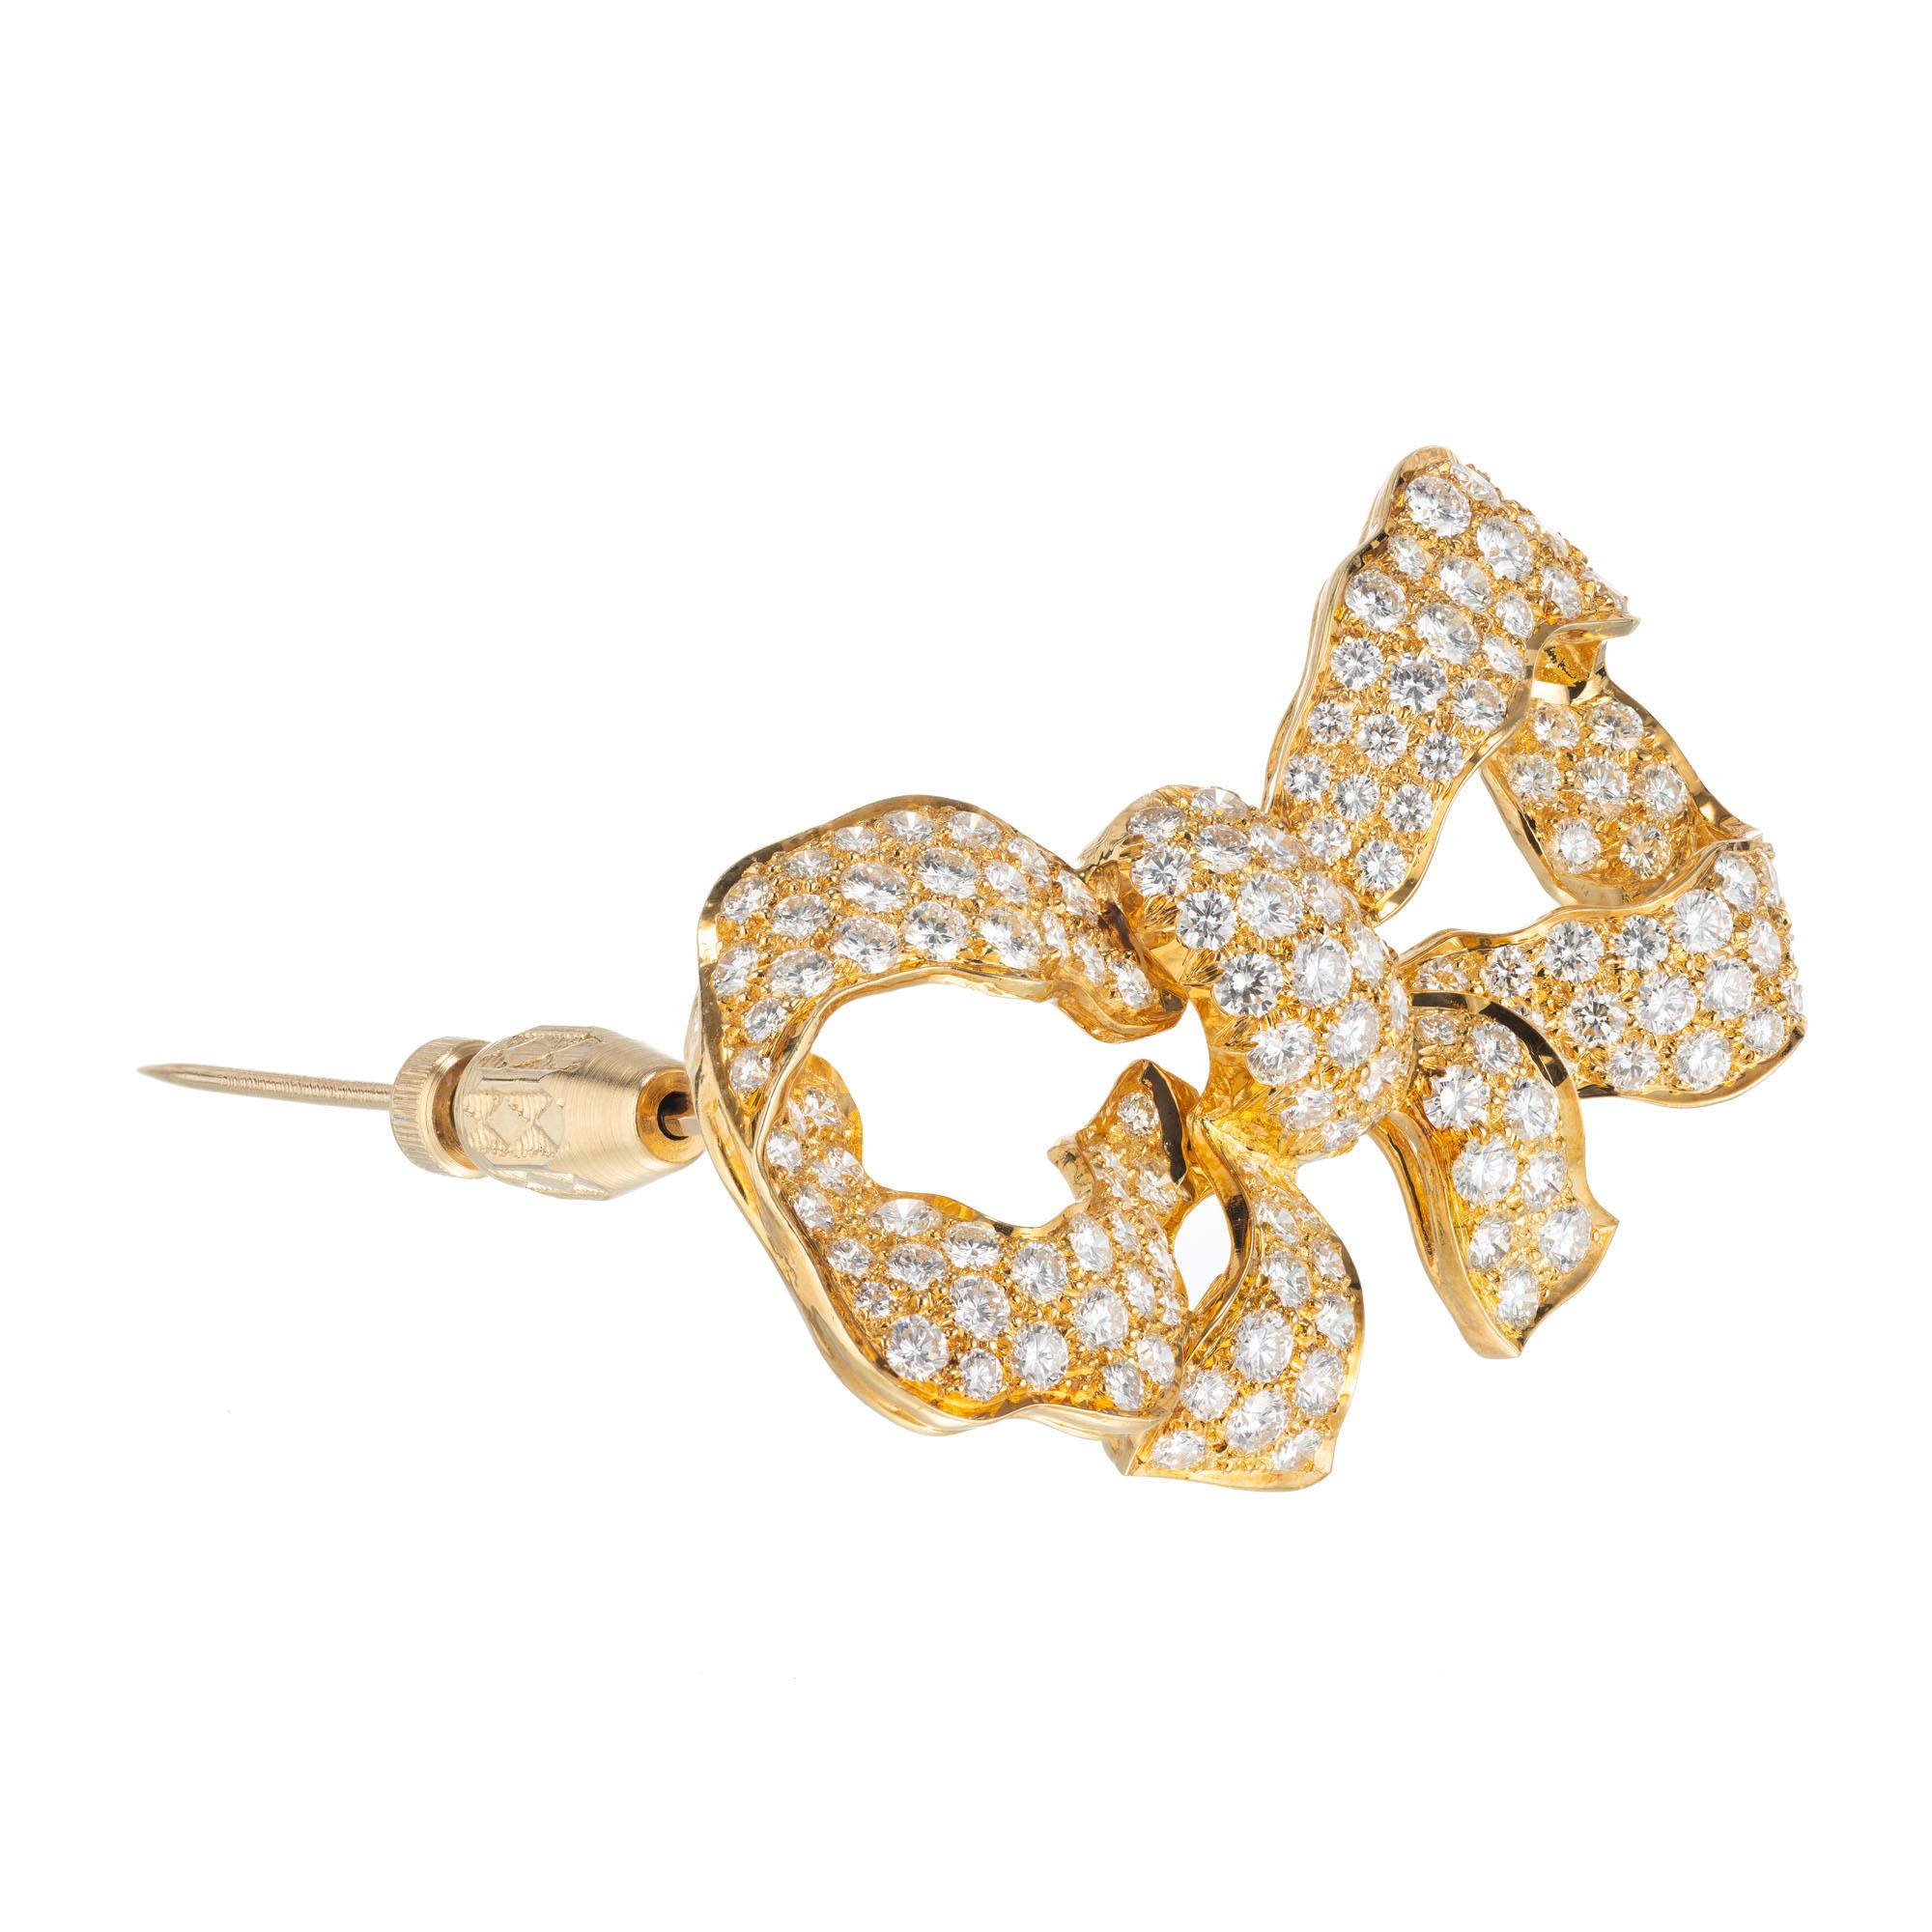 Custom made 18k yellow gold bow brooch set with 146 pave round brilliant cut diamonds. 

146 round brilliant cut diamonds, F-G VS approx. 5.25cts
18k yellow gold 
Stamped: 18k
16.7 grams
Top to bottom: 28mm or 1 1/8 Inch
Width: 47.1mm or 1 7/8
Depth